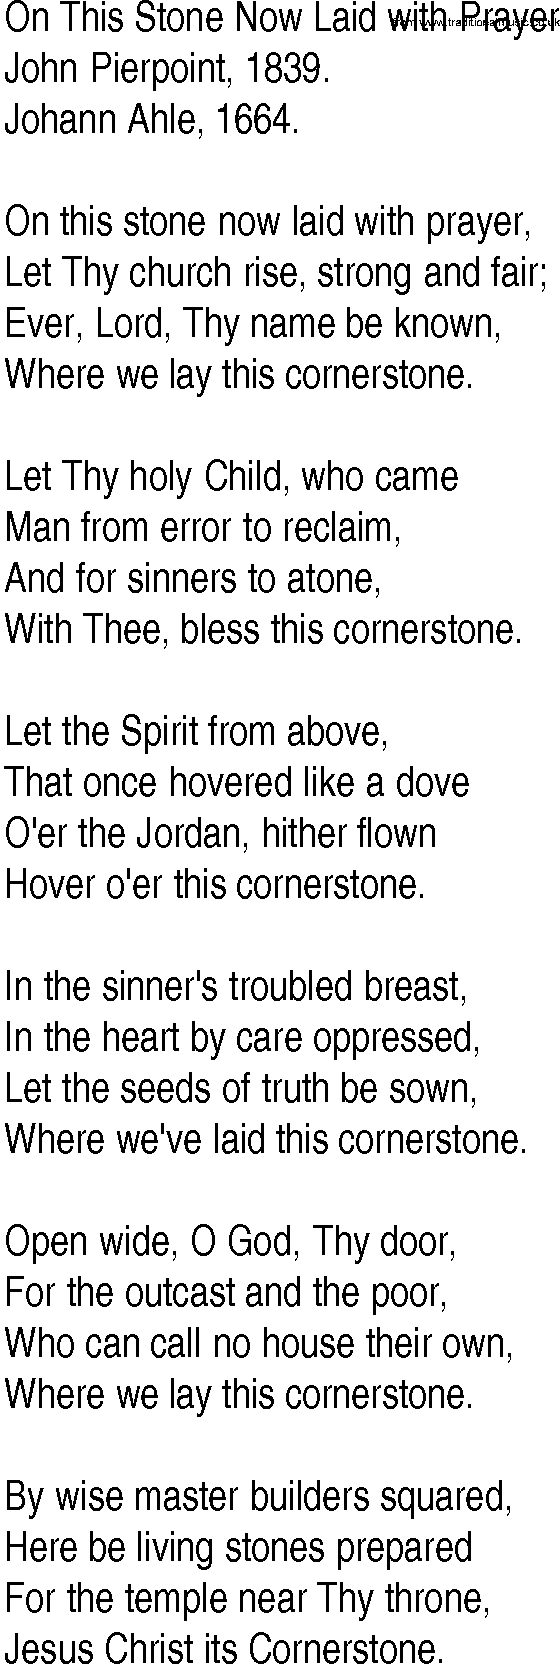 Hymn and Gospel Song: On This Stone Now Laid with Prayer by John Pierpoint lyrics